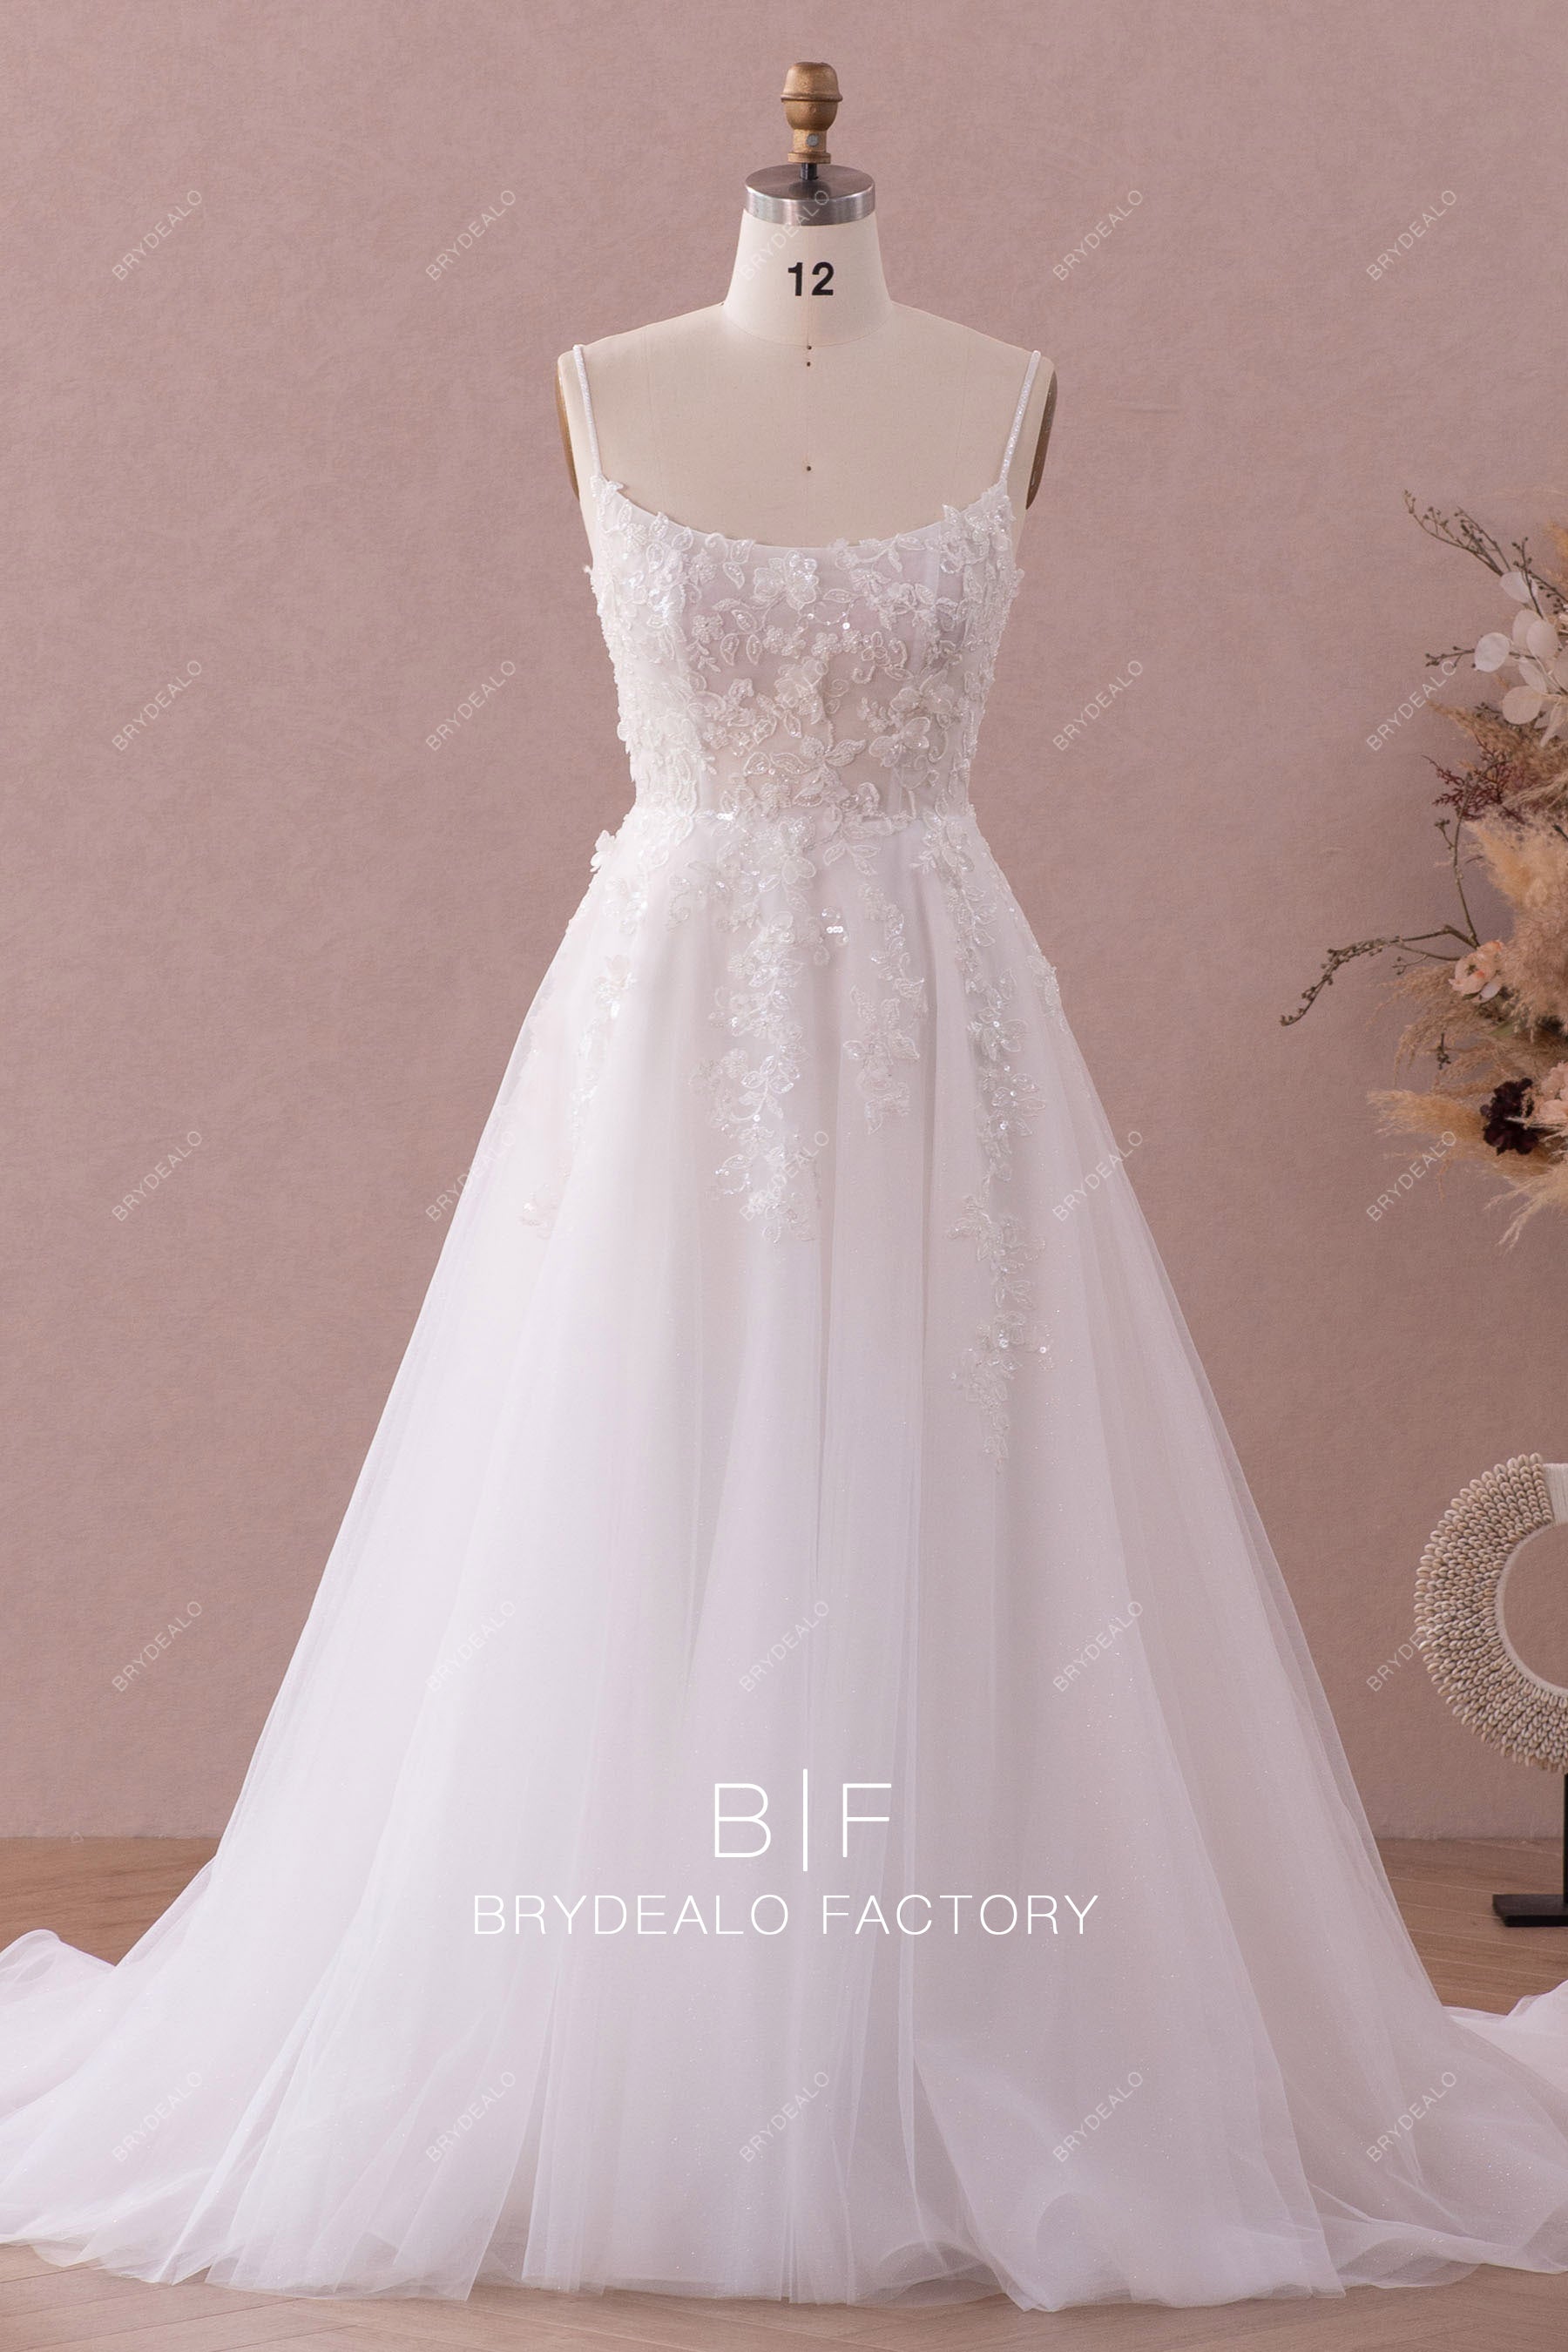 shimmery Aline flower lace wedding gown